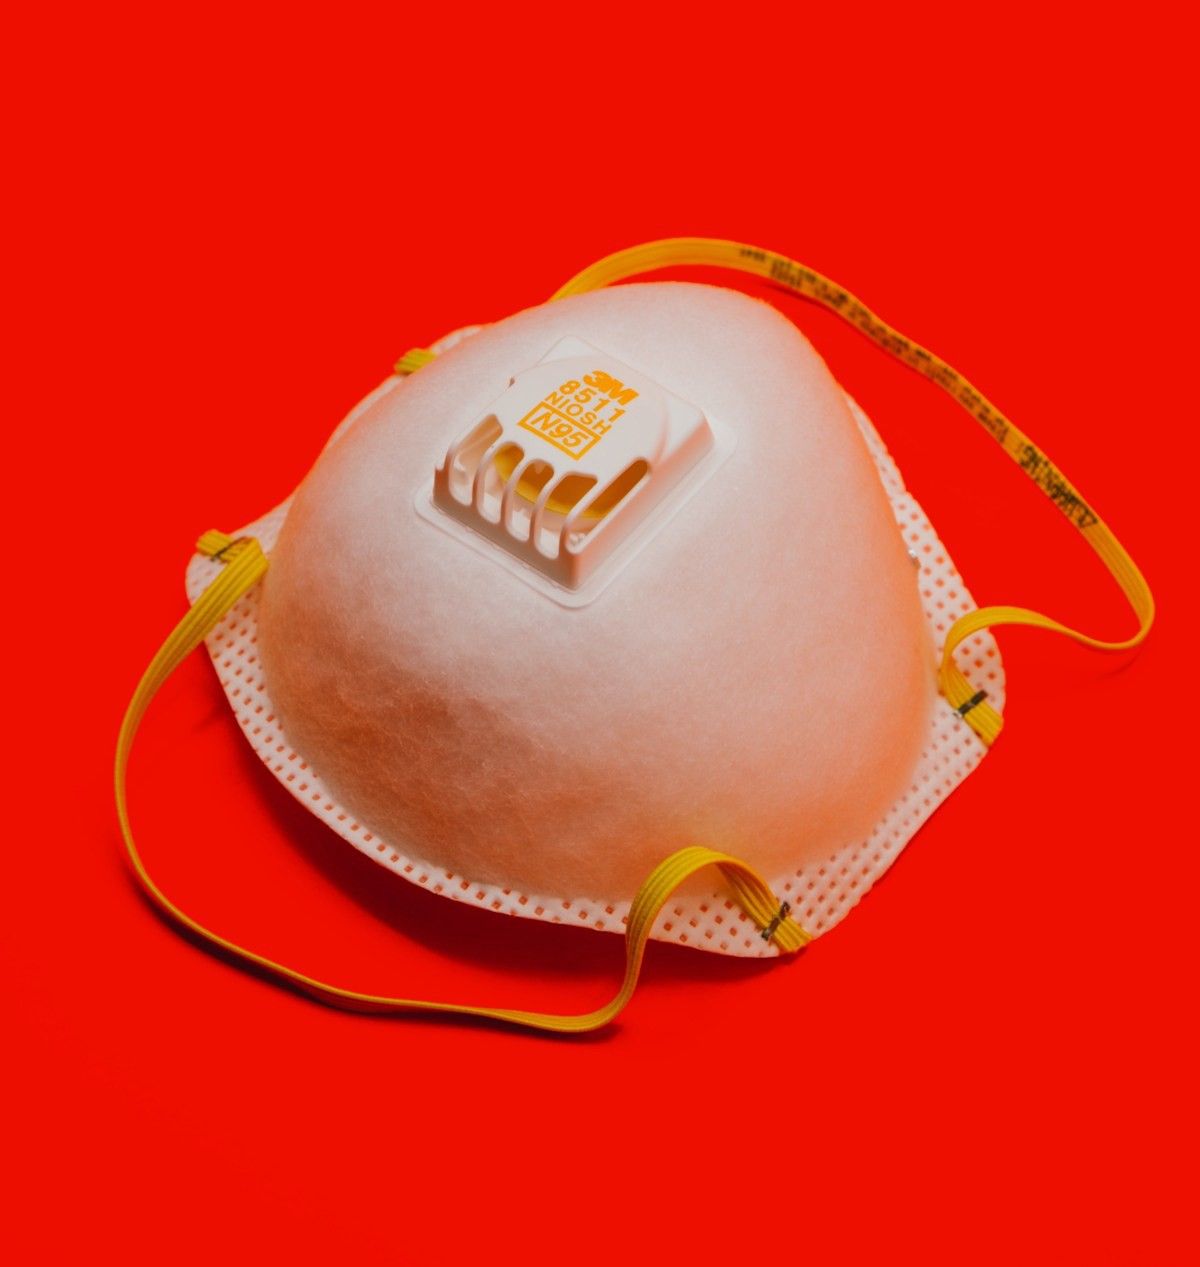 respirator on a red background